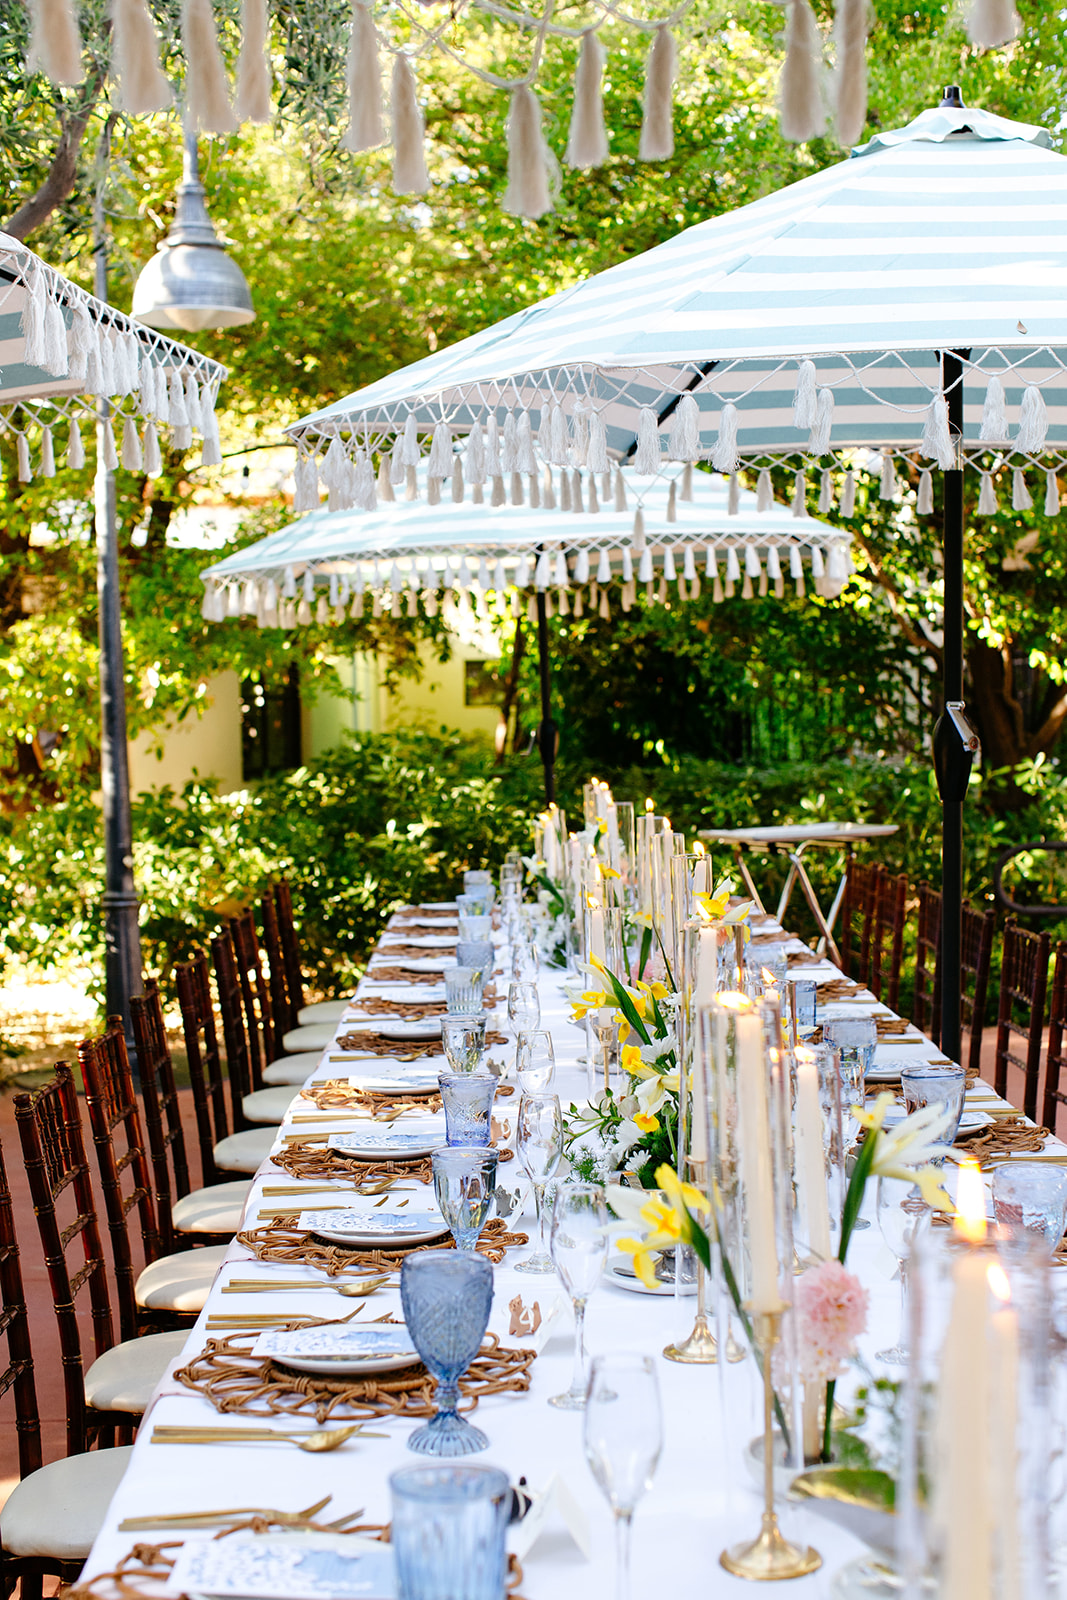 A long table set for outdoor dining with white tablecloths, arranged place settings, floral centerpieces, and tall candles, under striped umbrellas in a garden setting.